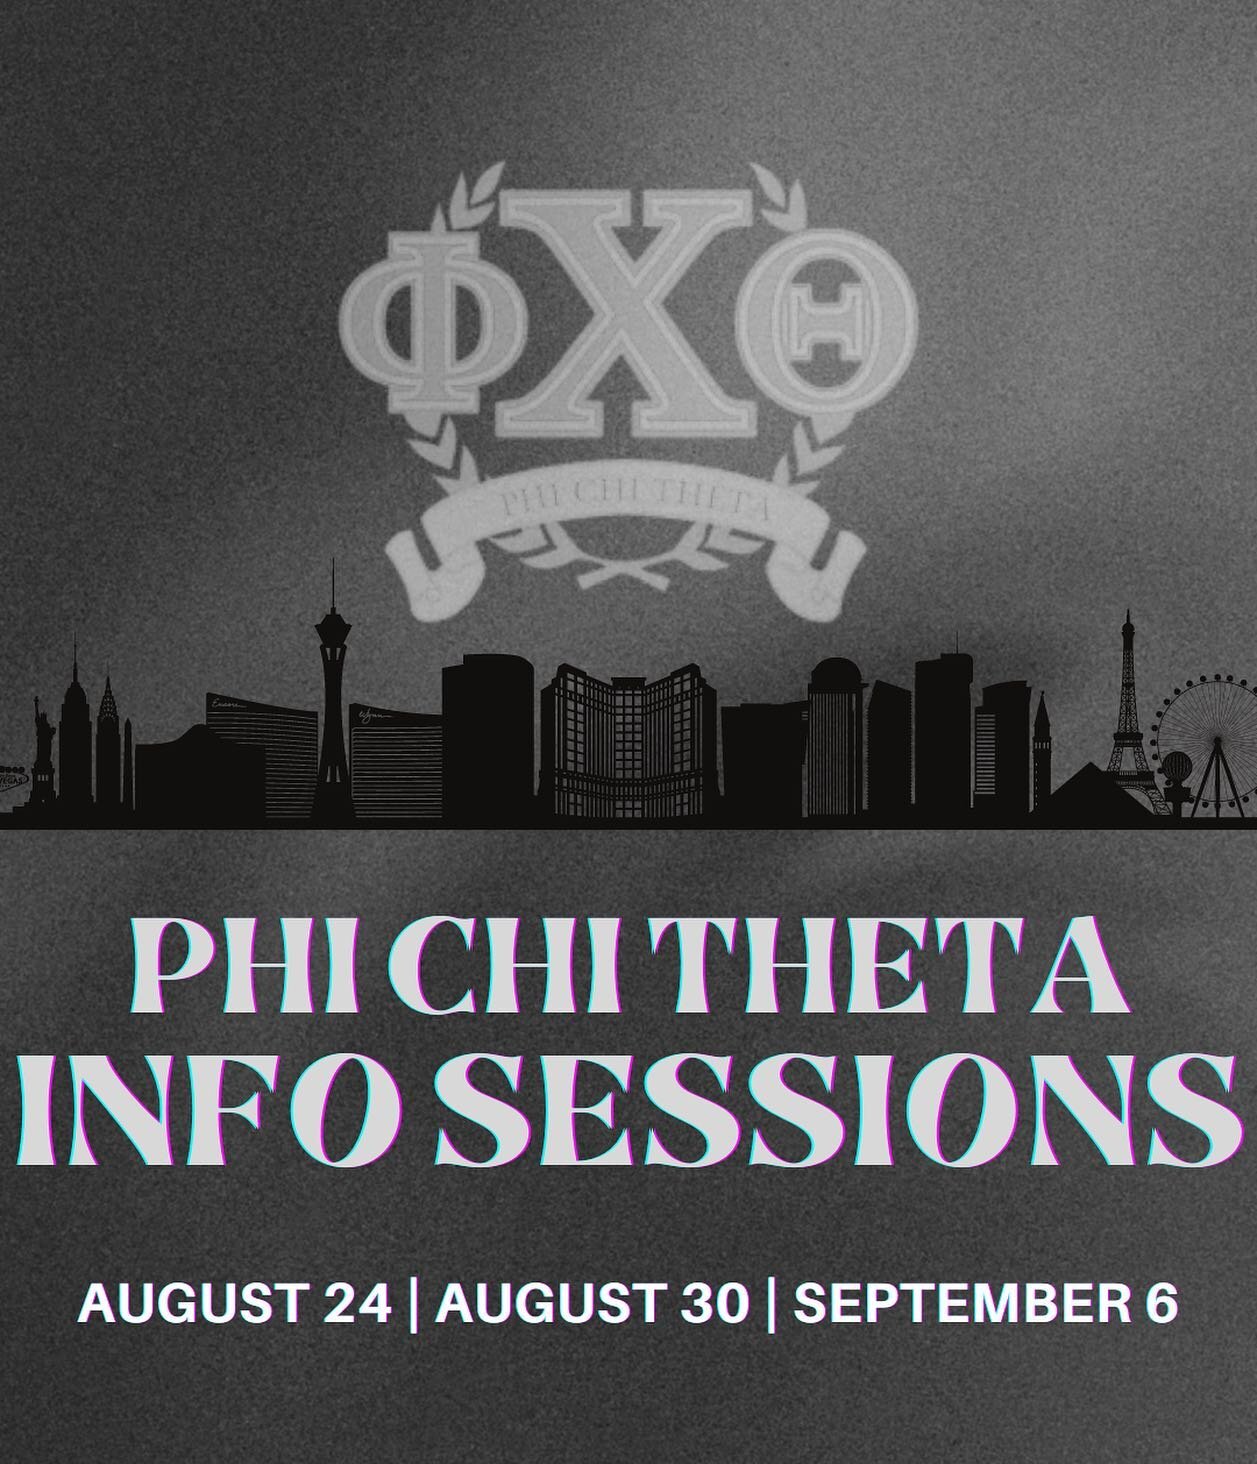 Rush starts this week!!! Make sure you join the GroupMe in our bio and attend an info session. First info session is tonight at 6pm in UTC 4.110‼️